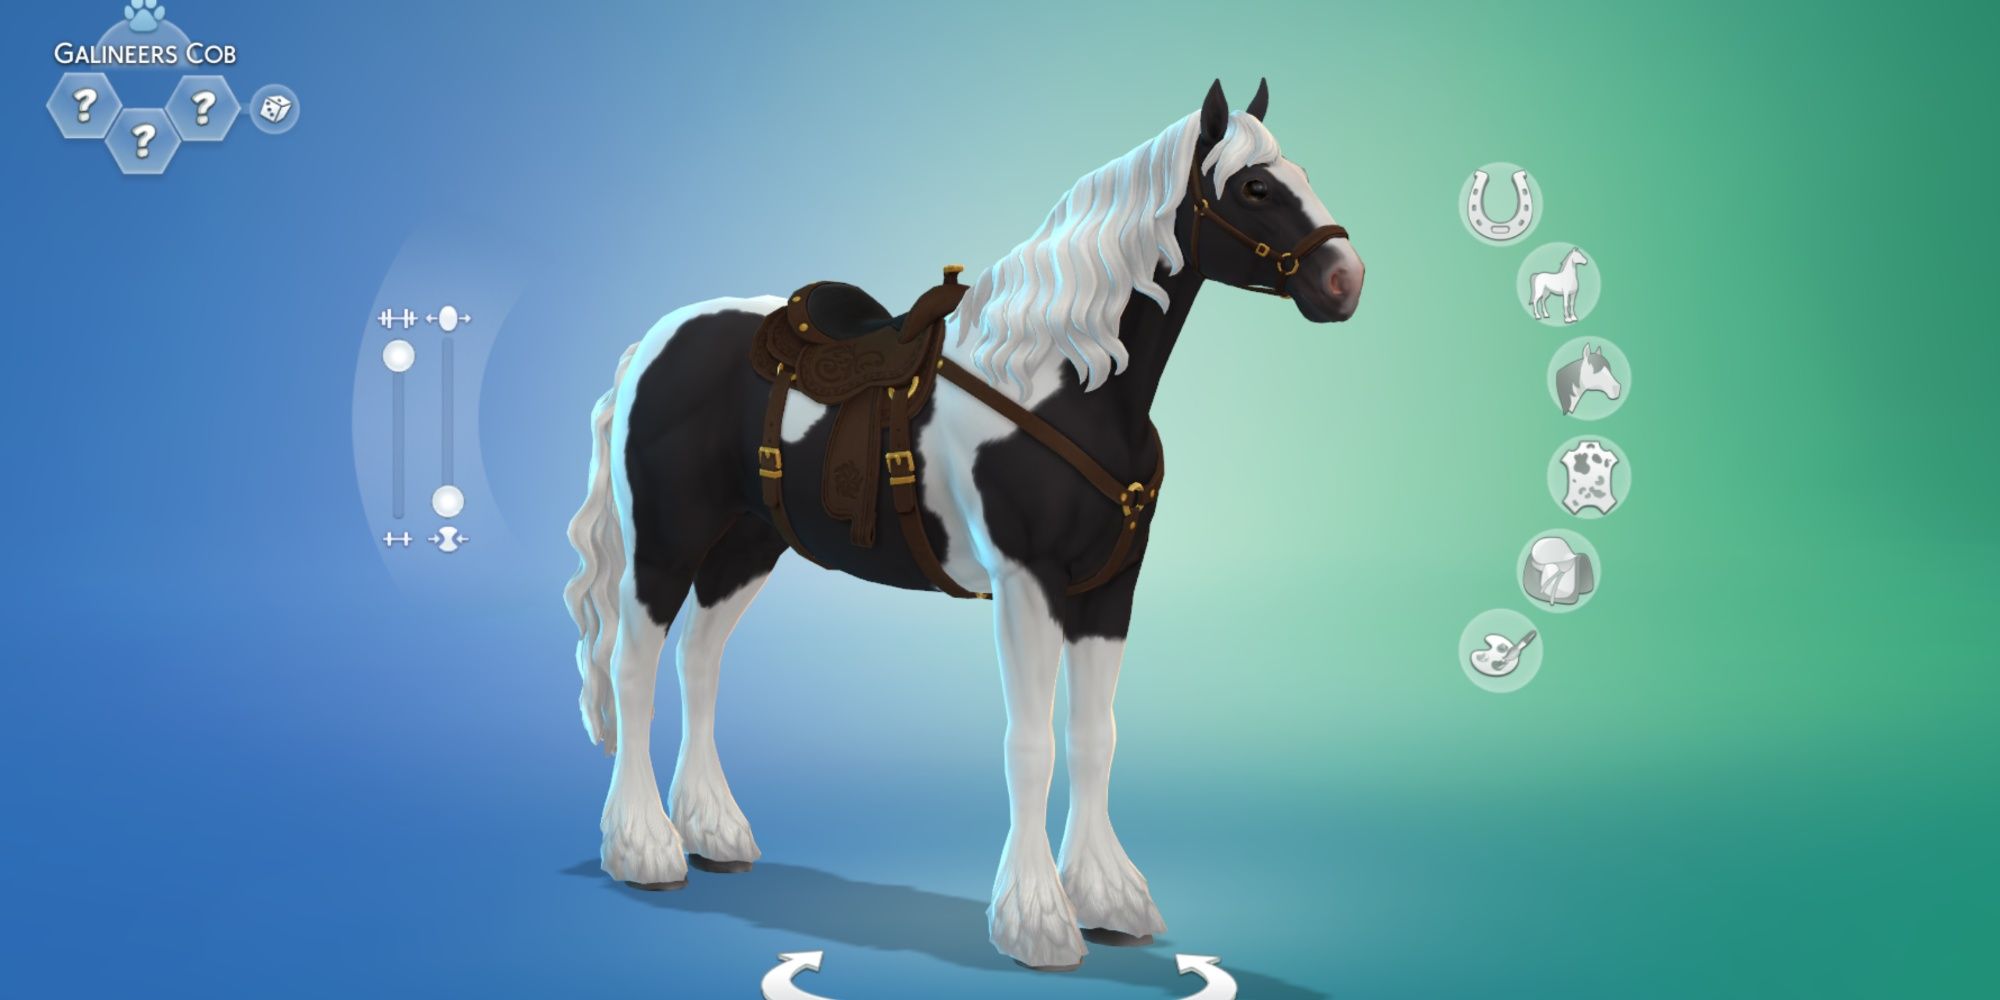 The Sims 4 Horse Ranch - Galineers Cob Horse in CAS